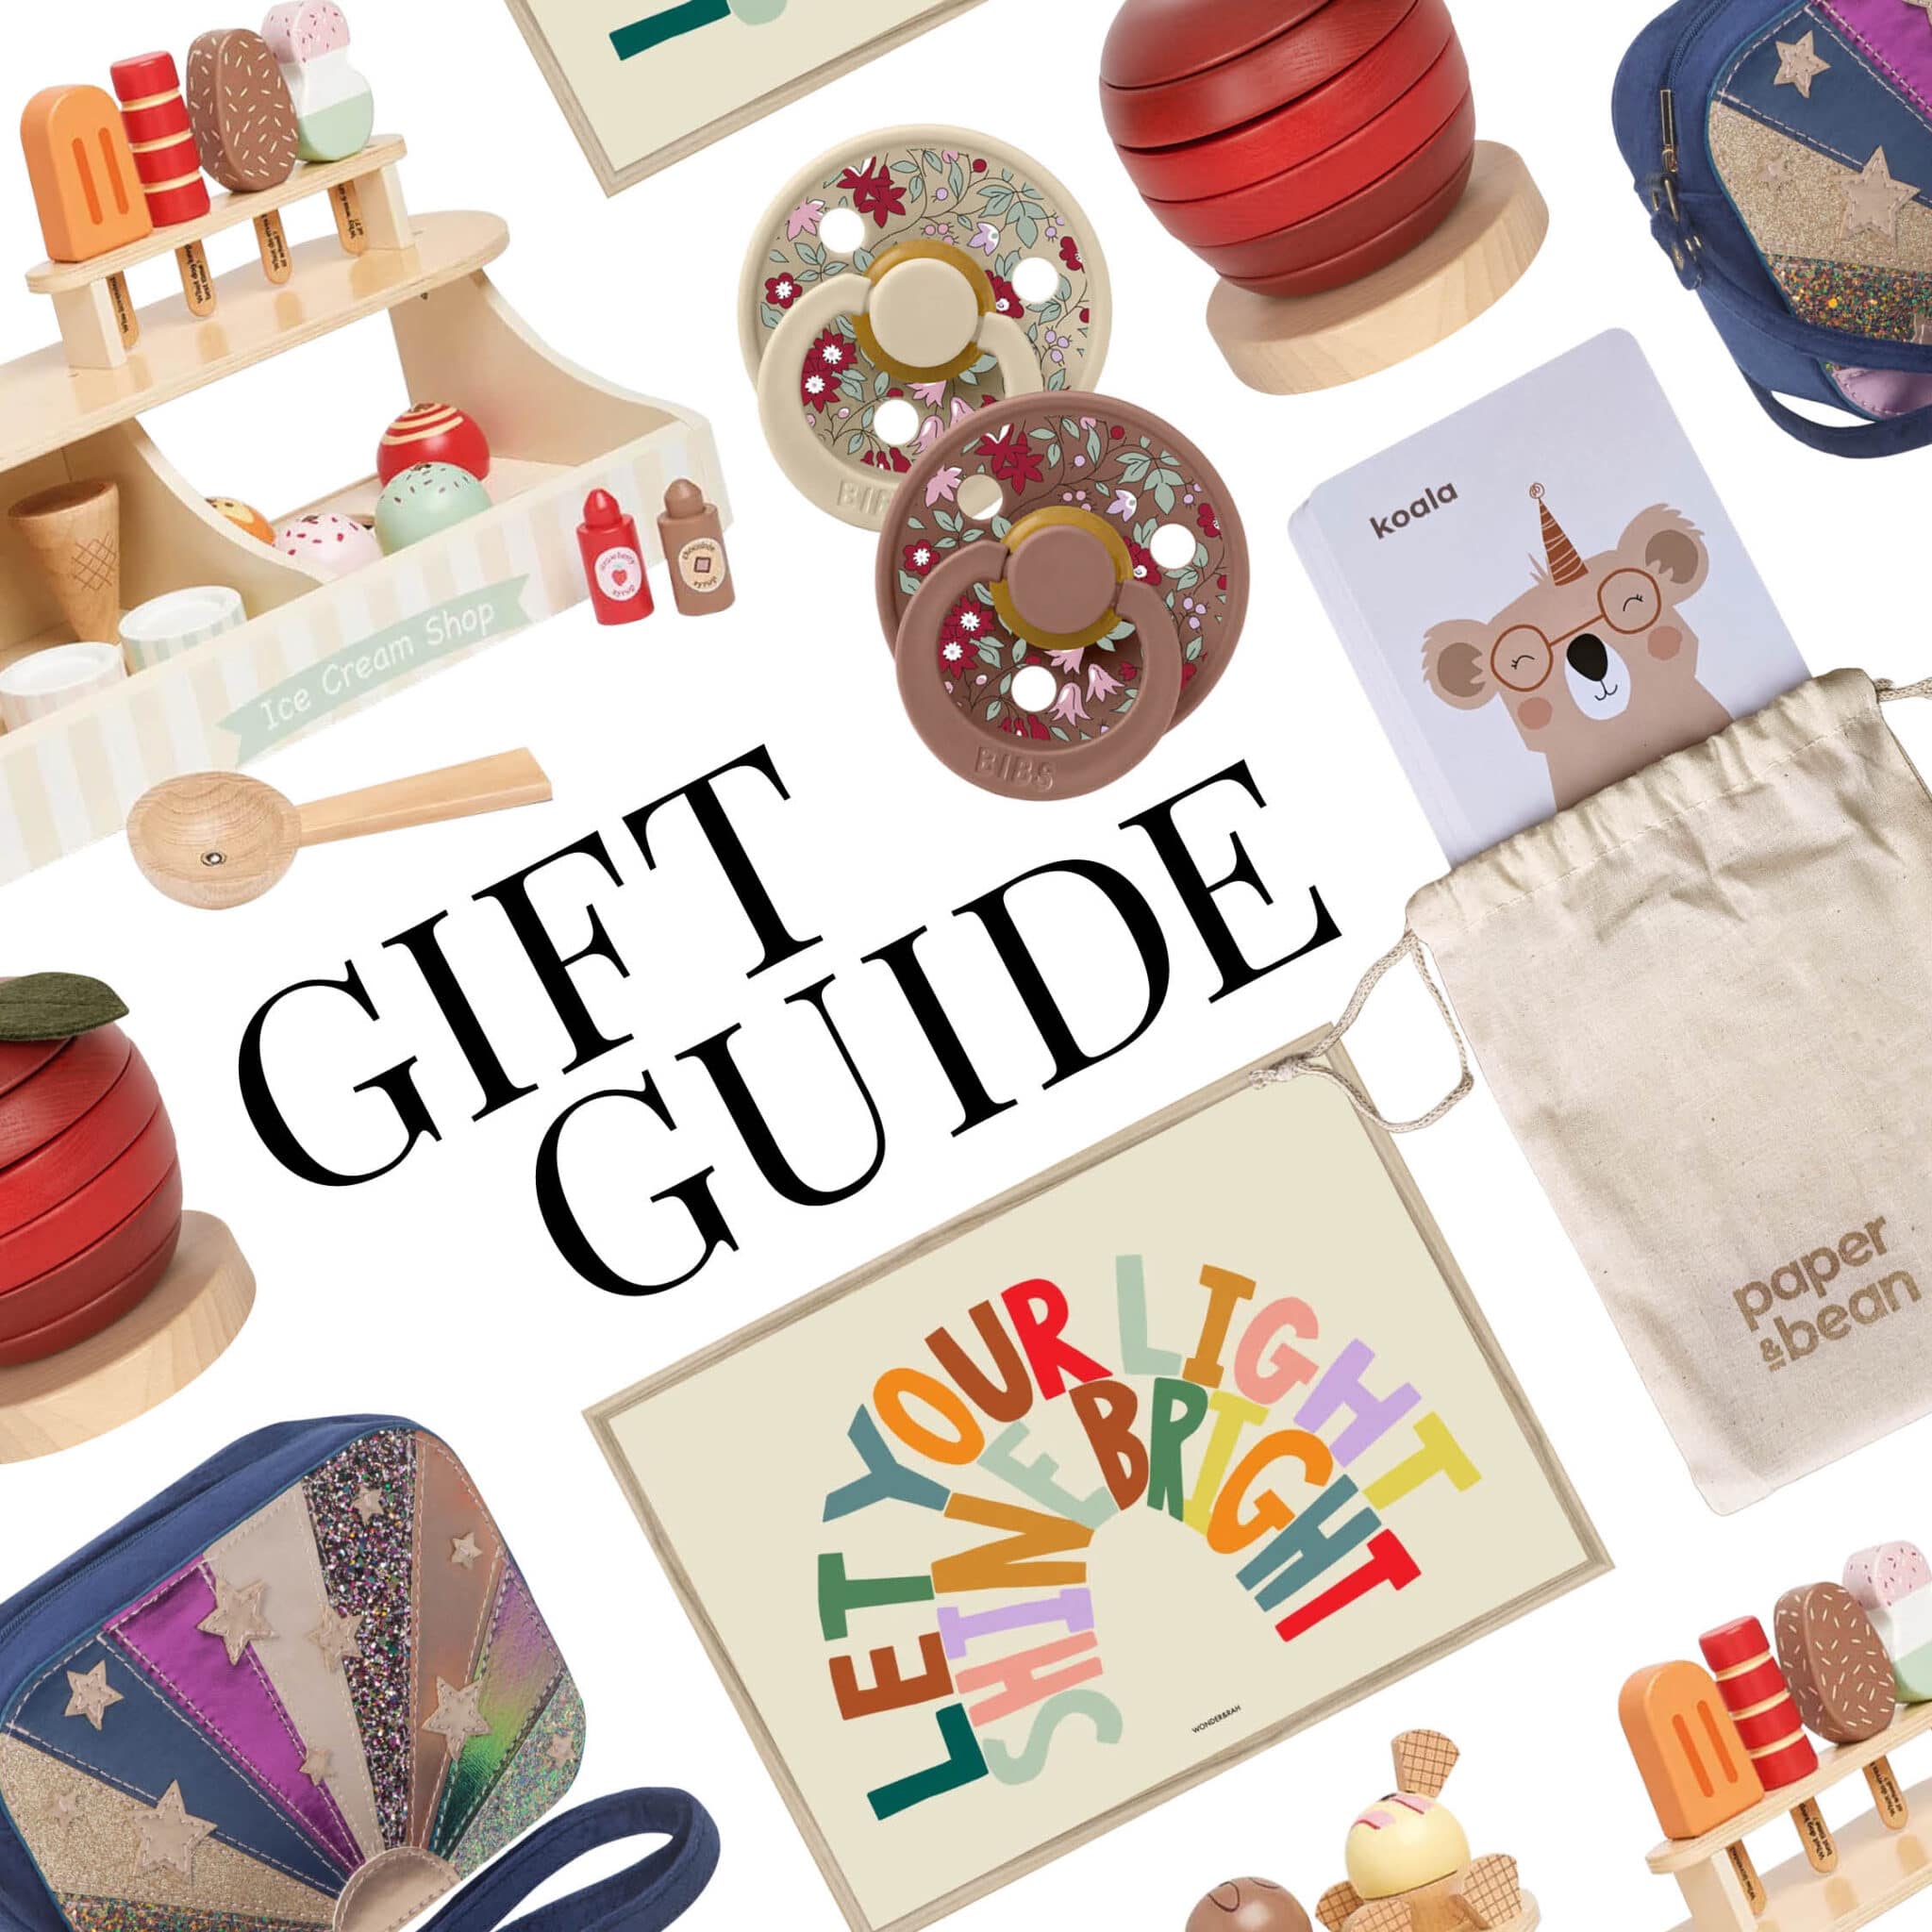 The Best Christmas Gifts for Kids